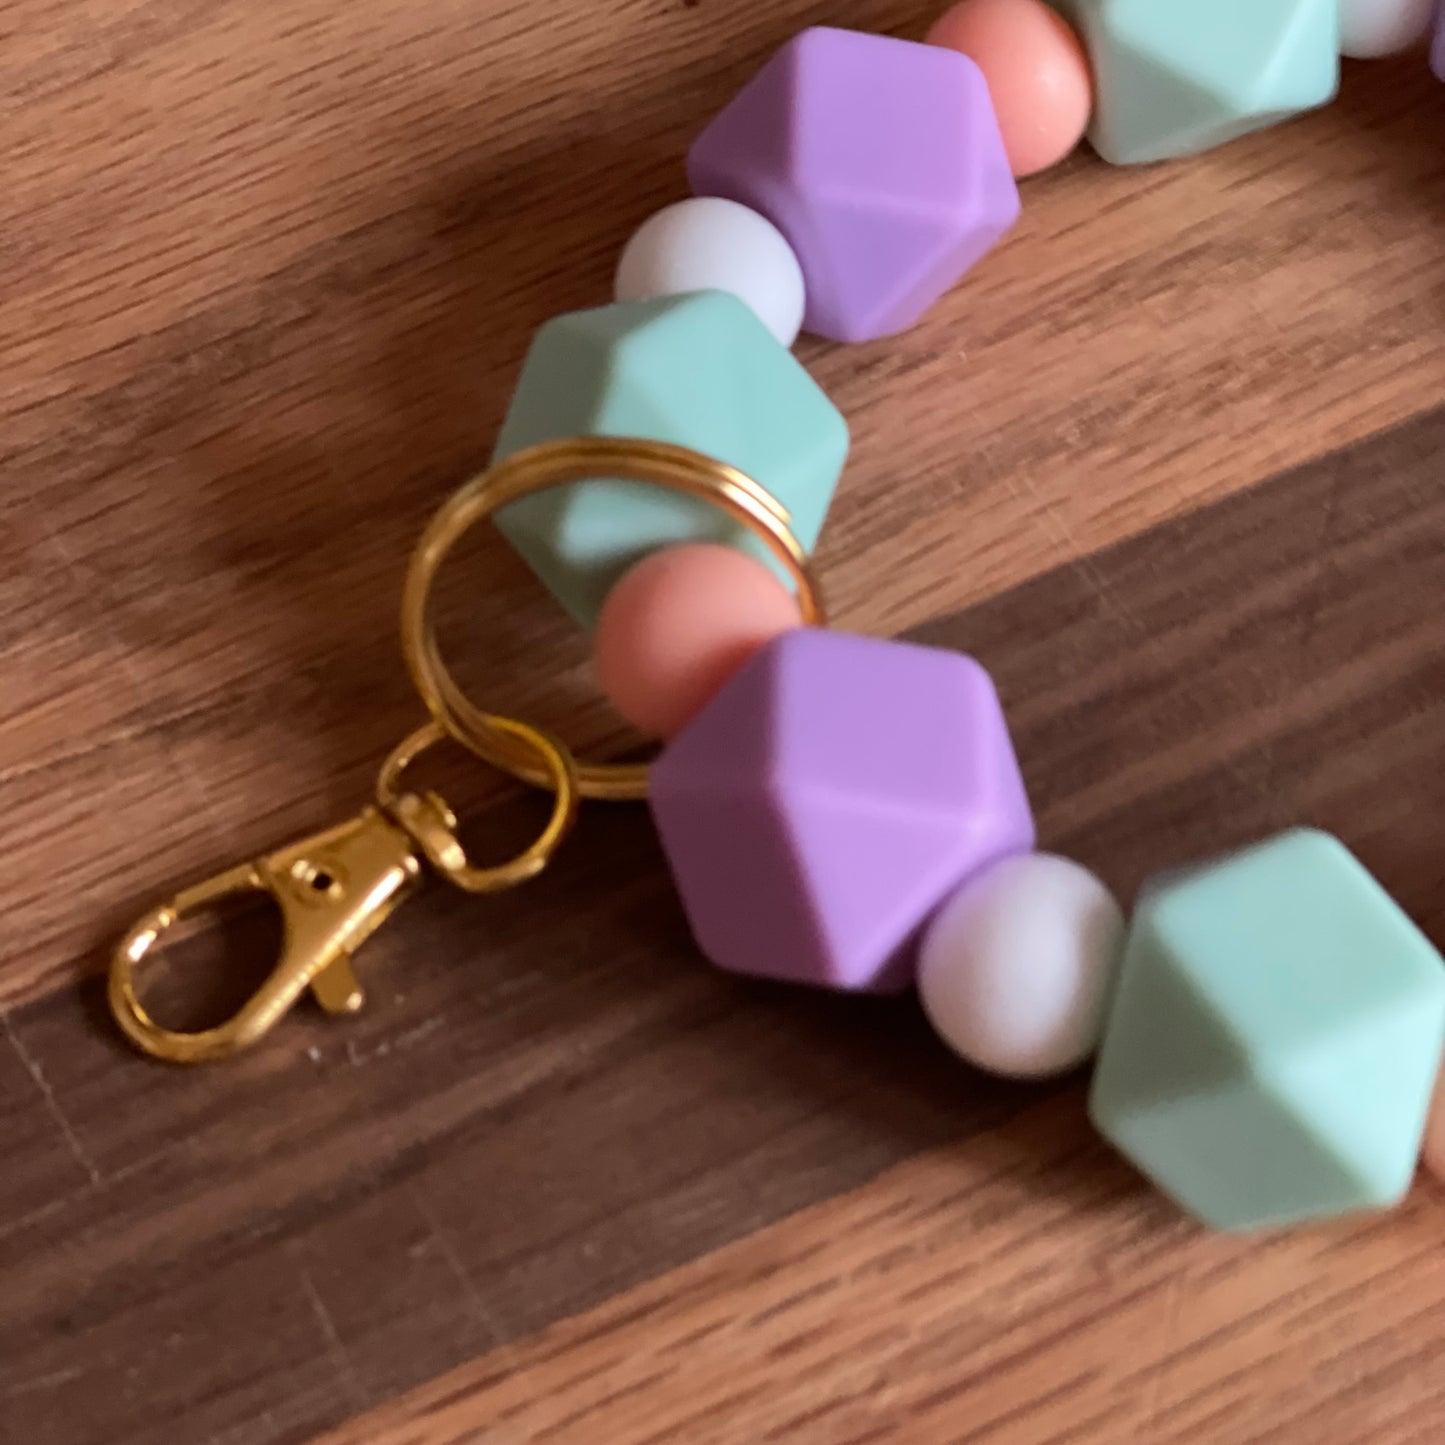 Light purple, peach, turquoise, and white silicone beaded wristlet keychain laying on flat surface focusing on gold keychain attachment